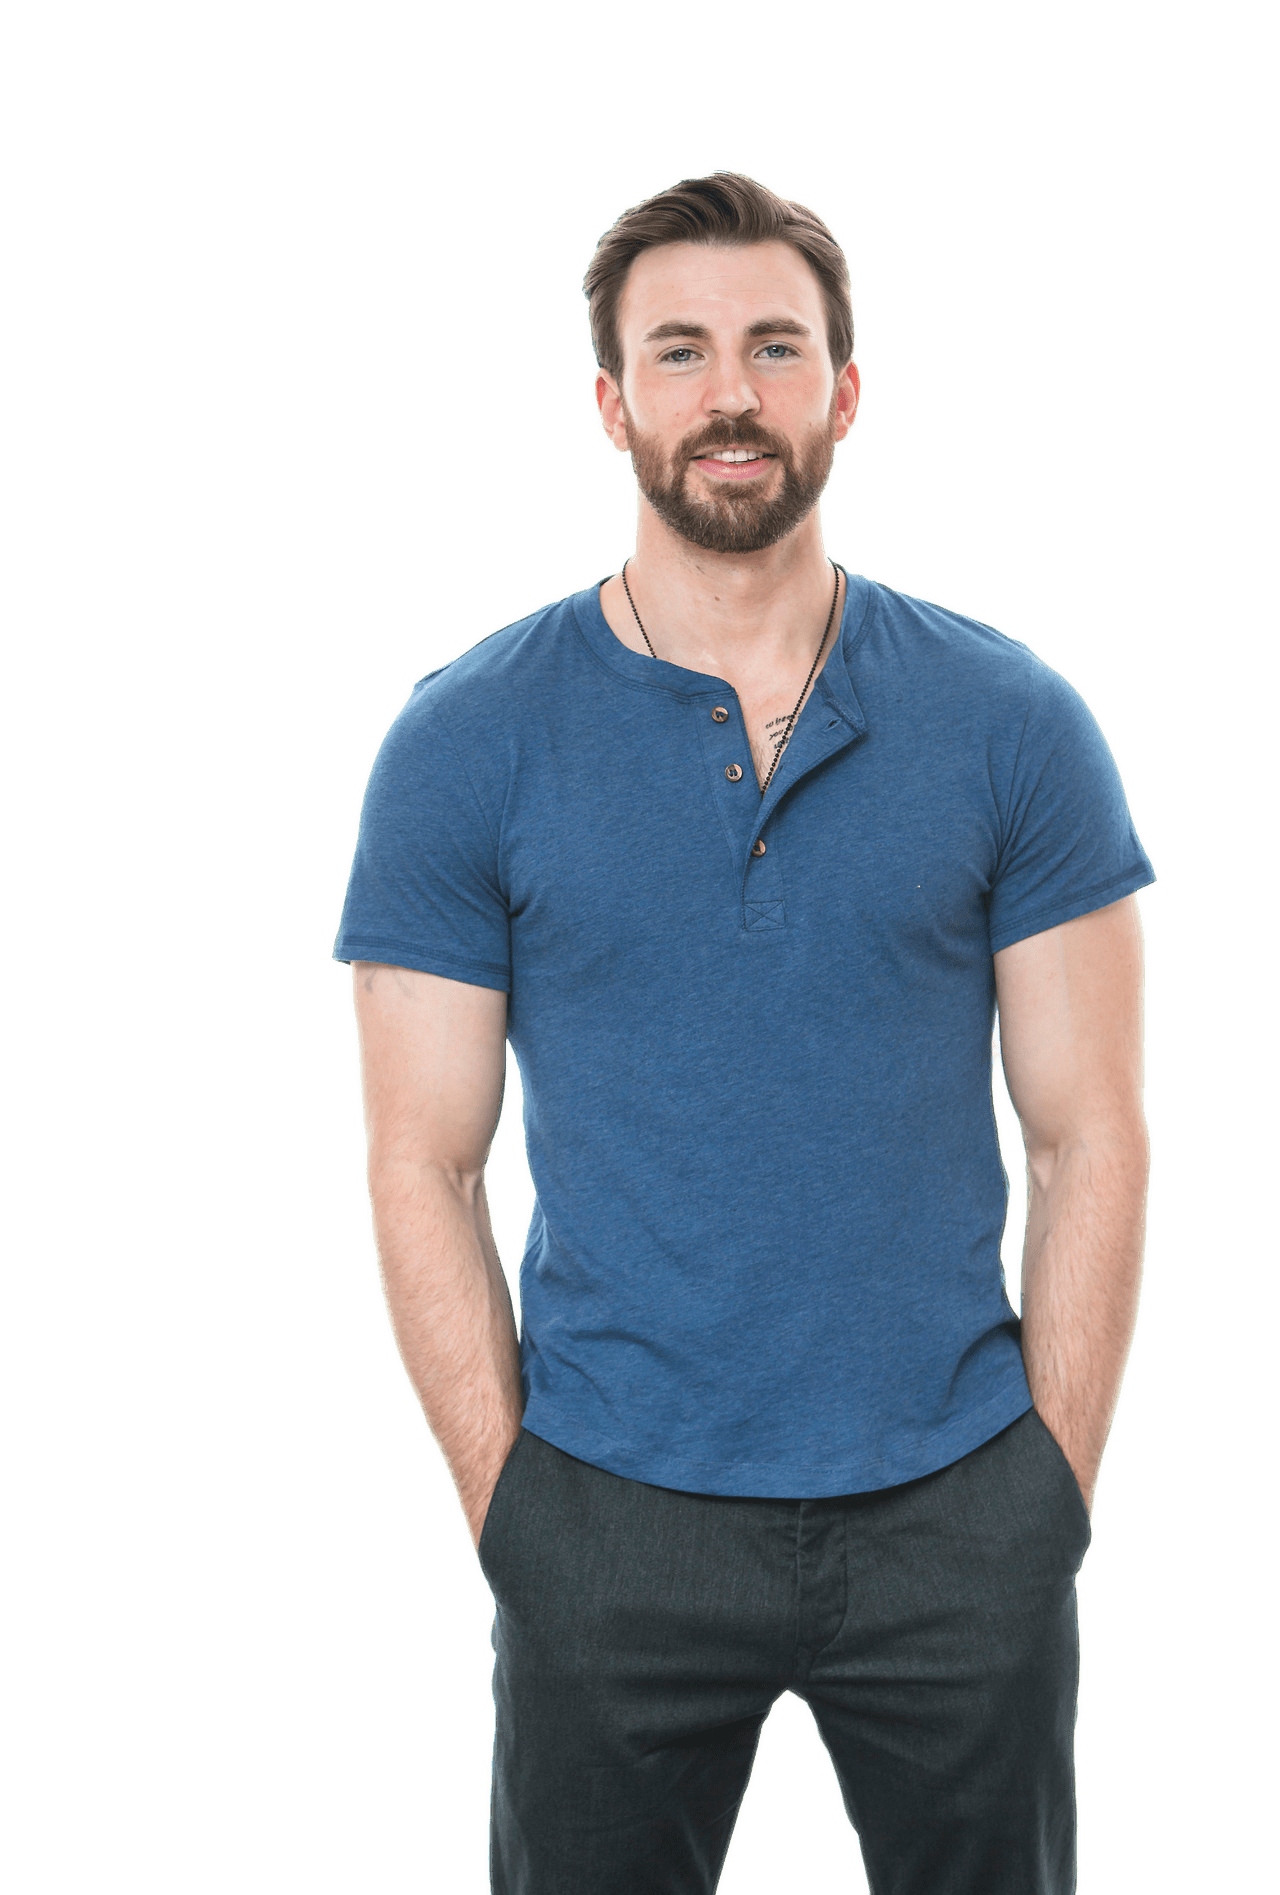 Chris Evans: Suited Up by kdo